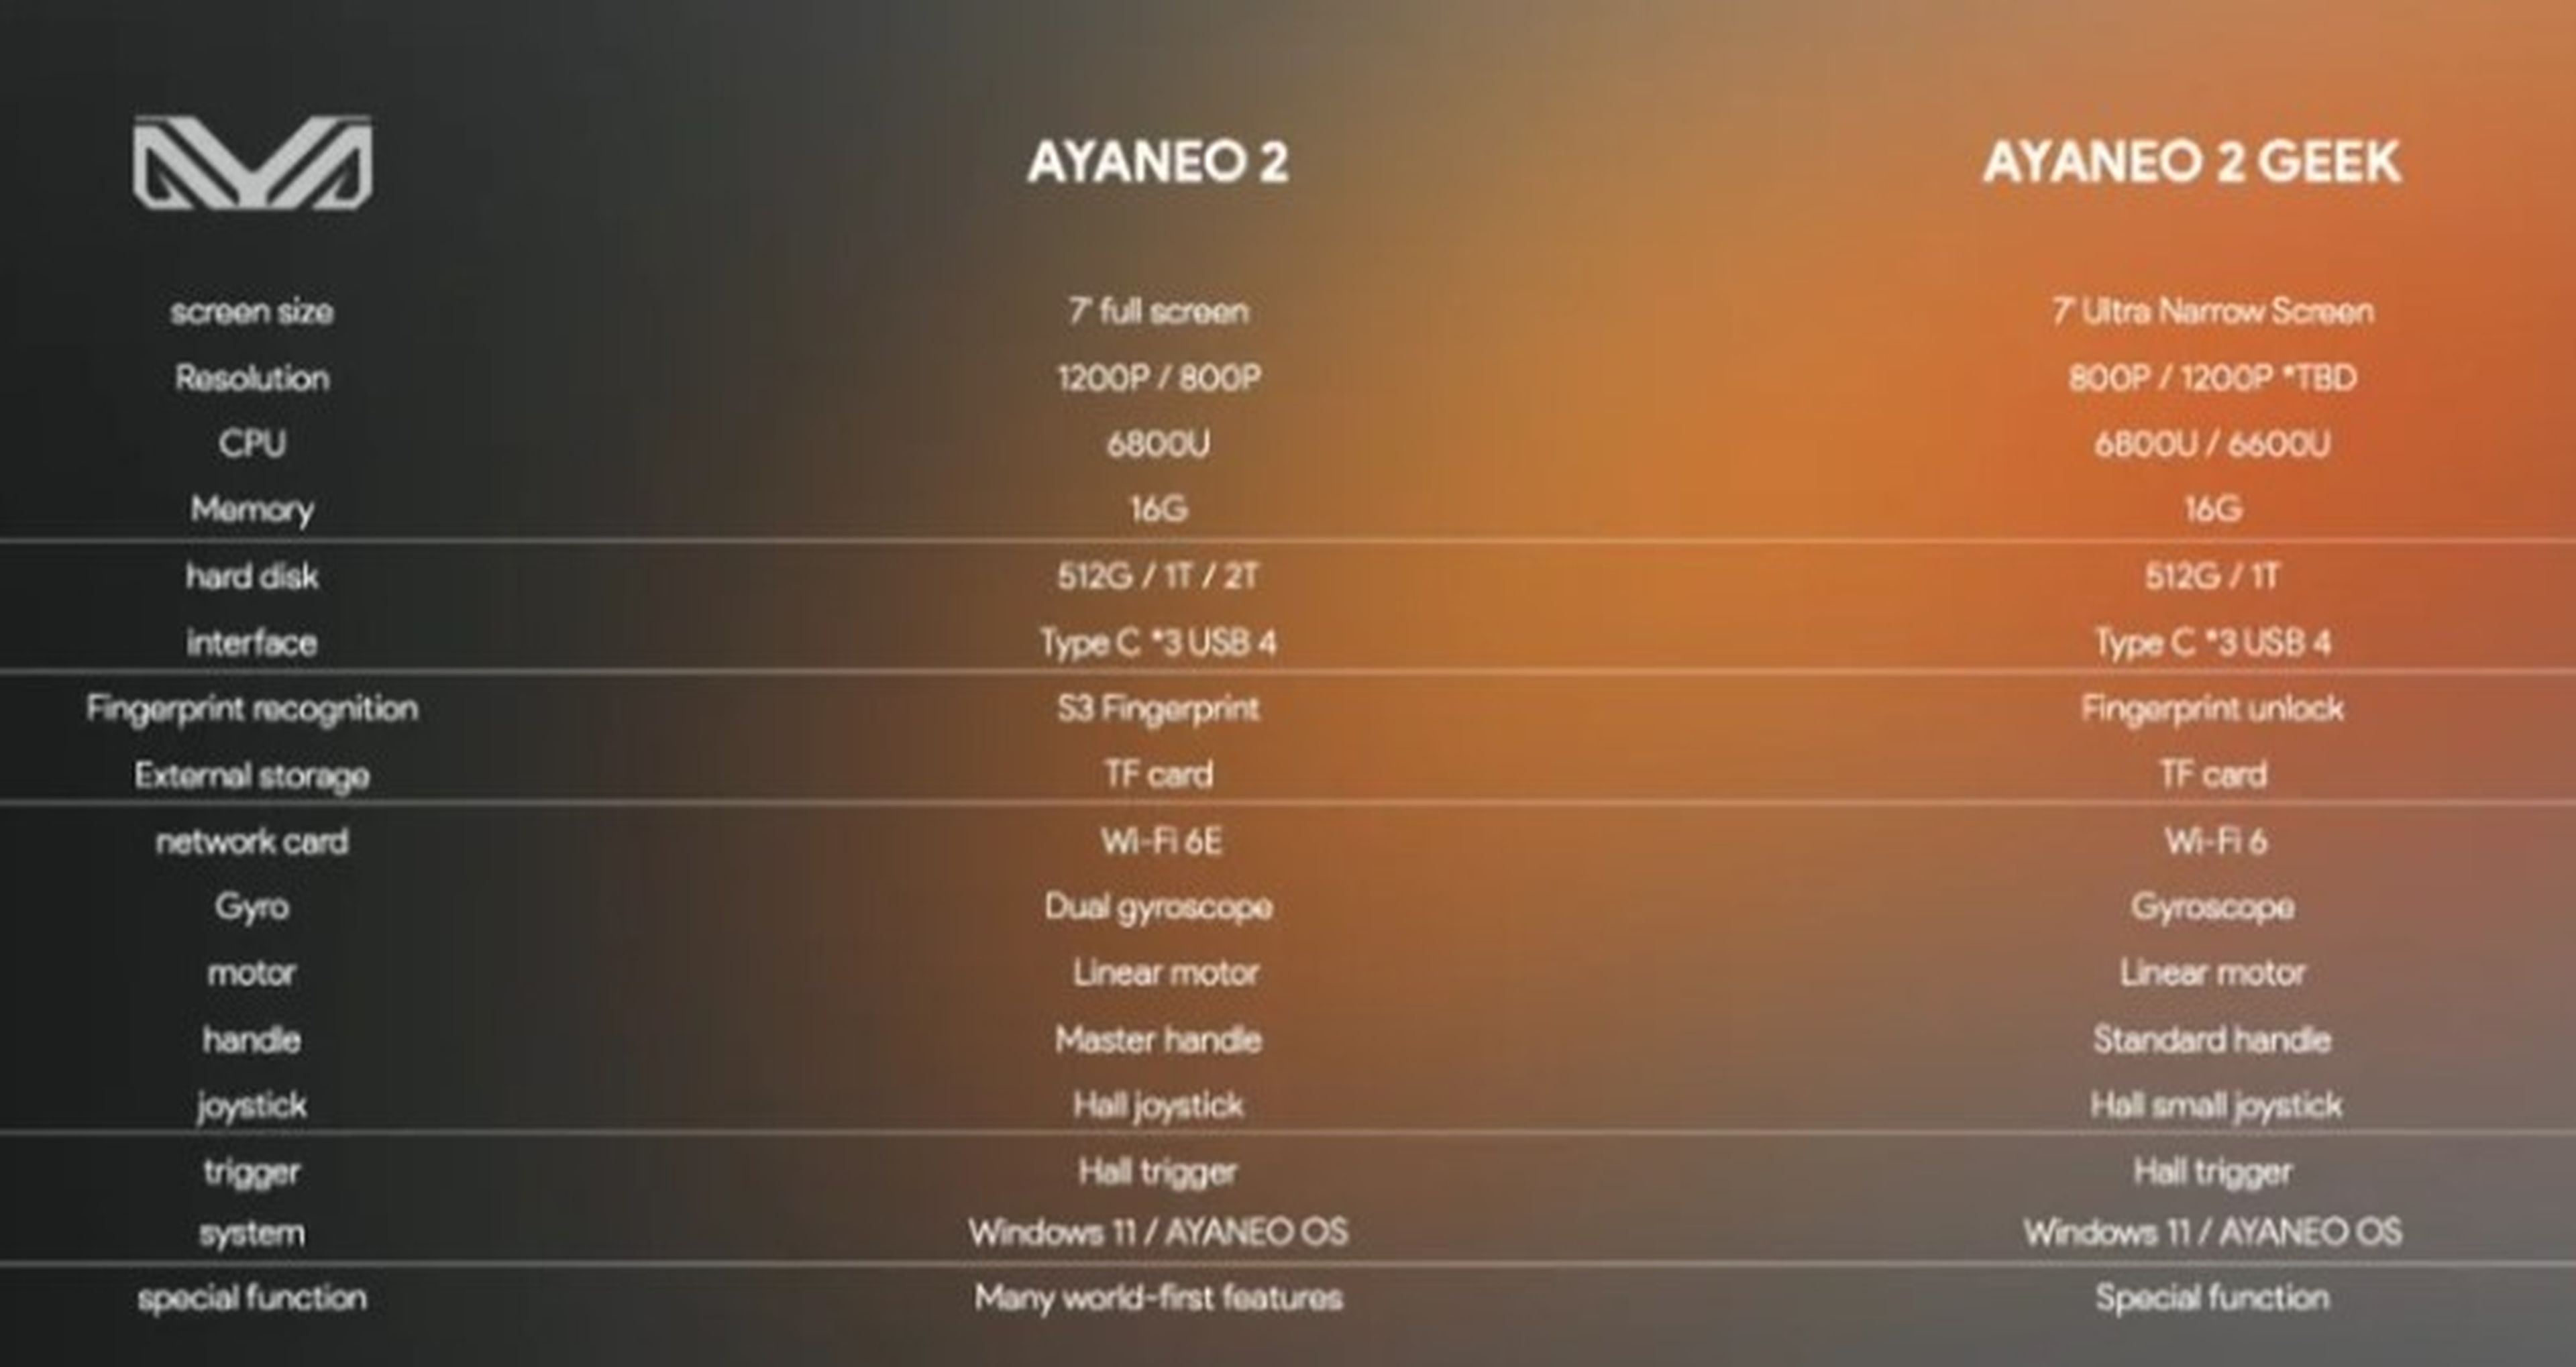 AYANEO 2